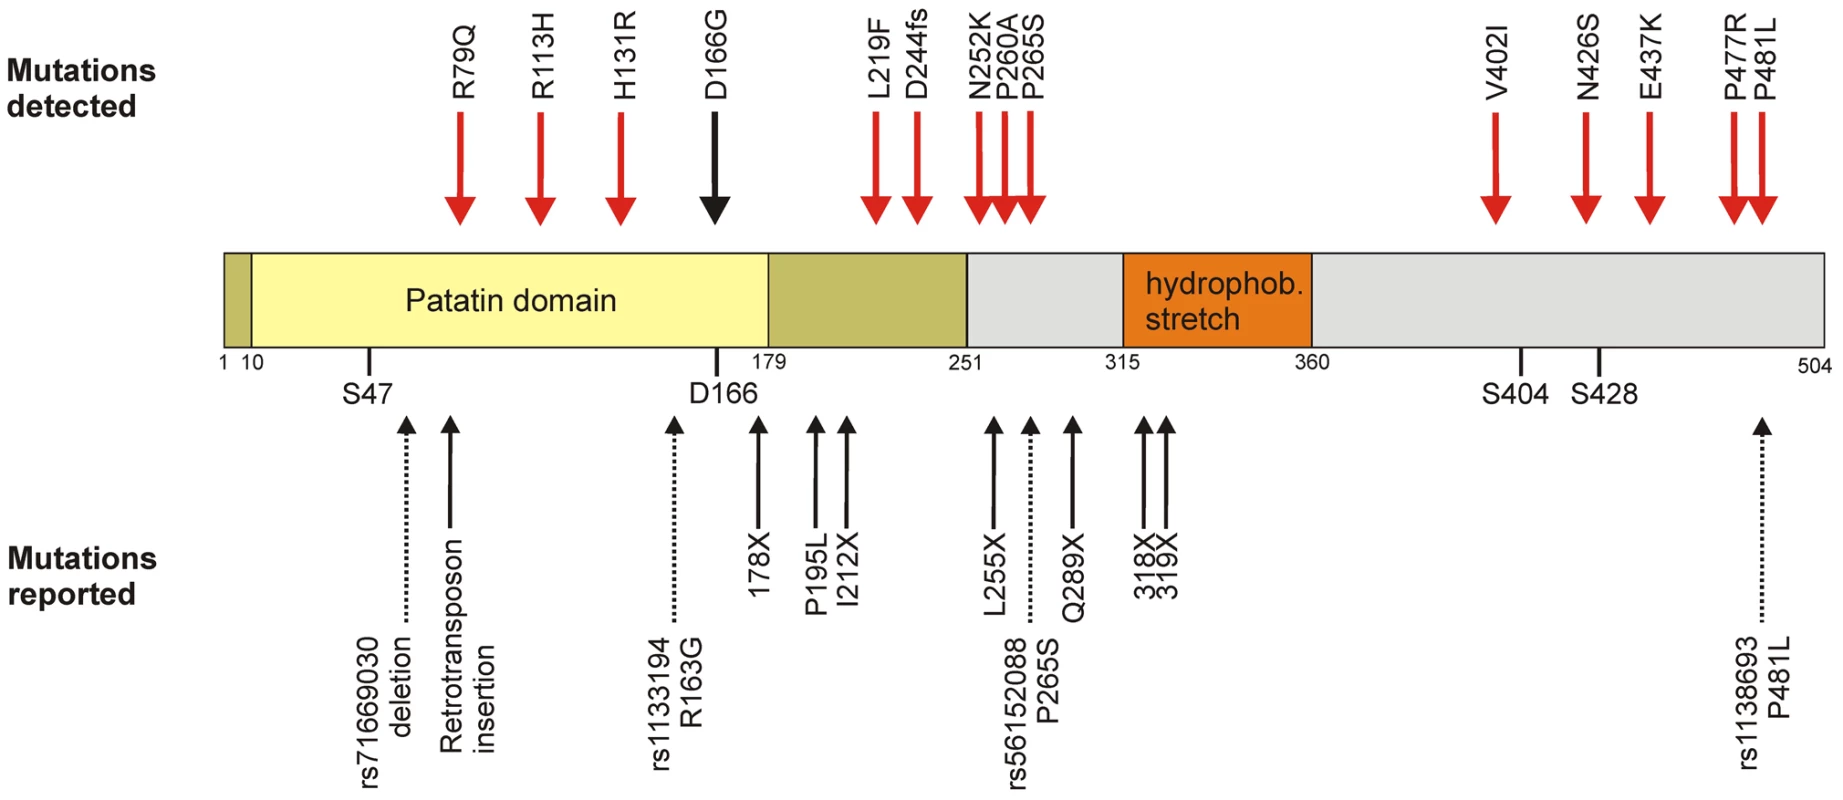 Domain organization and genetic variability of the ATGL protein.